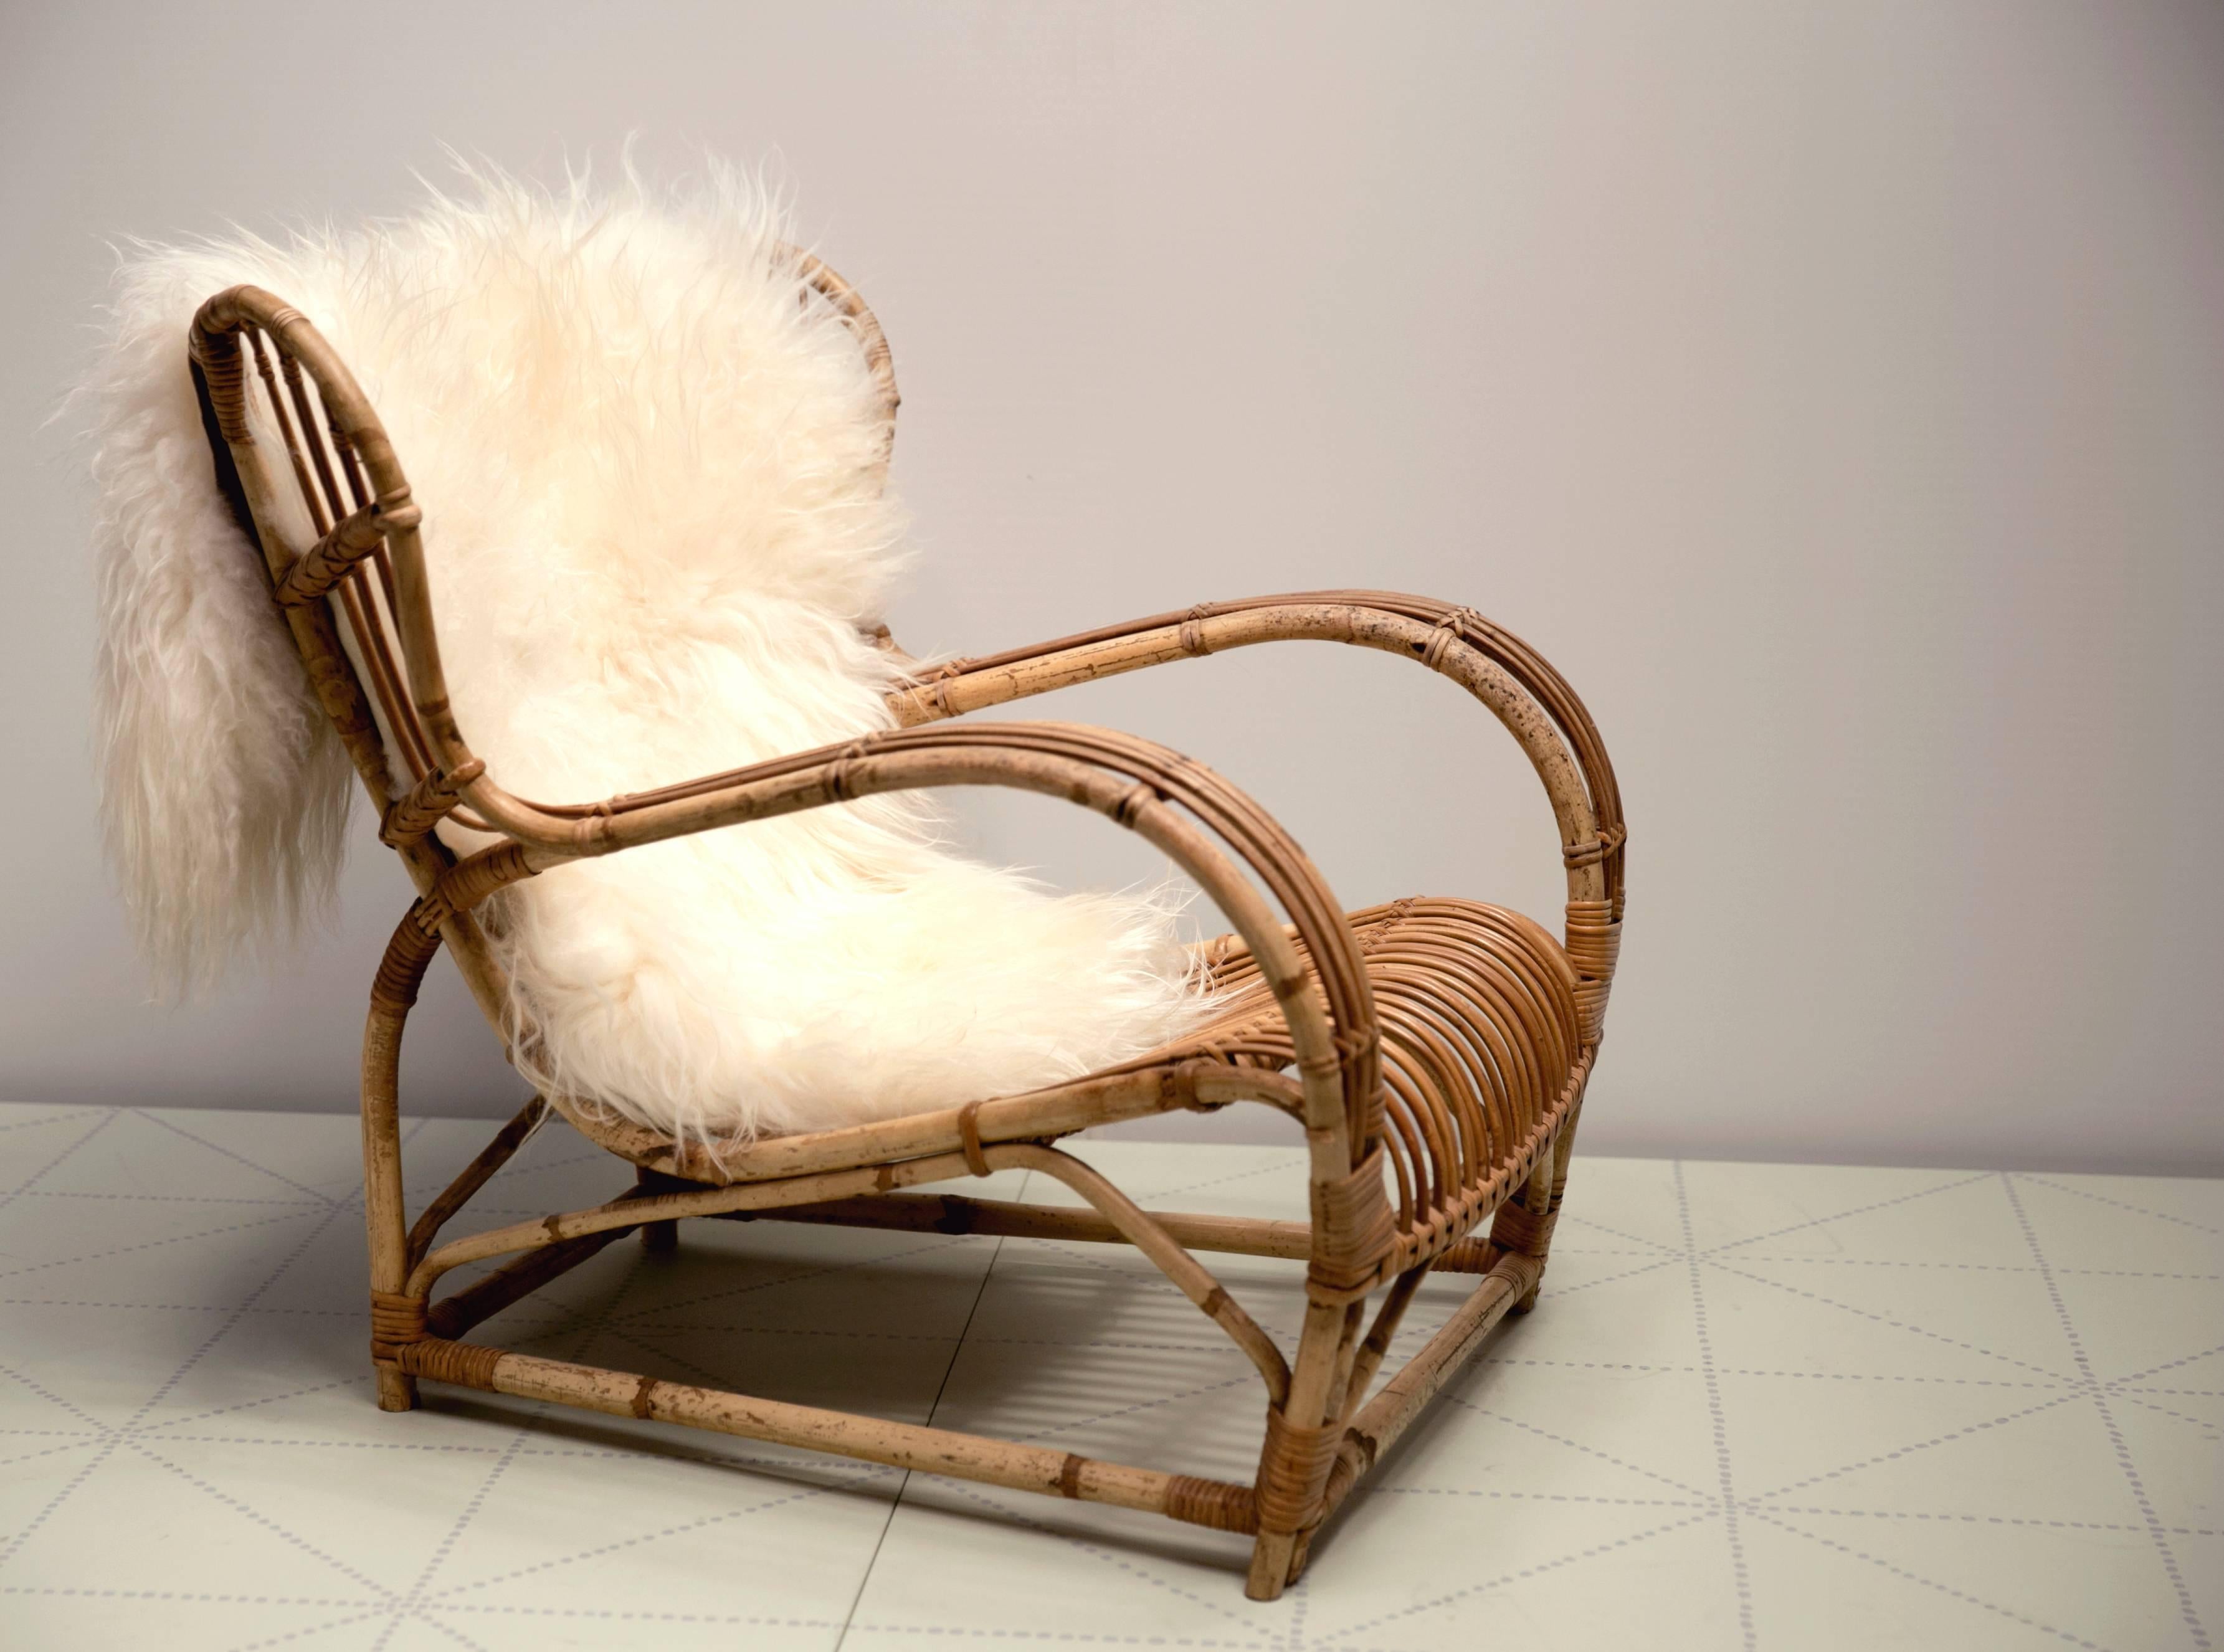 Designed 1936, this chair was made circa 1930s.

Made by R. Wengler, Copenhagen, with the maker’s plaque on the lower back of the frame.

R. Wengler was a Pioneer of wicker furniture design. The firm, who received the royal warrant in 1914, was